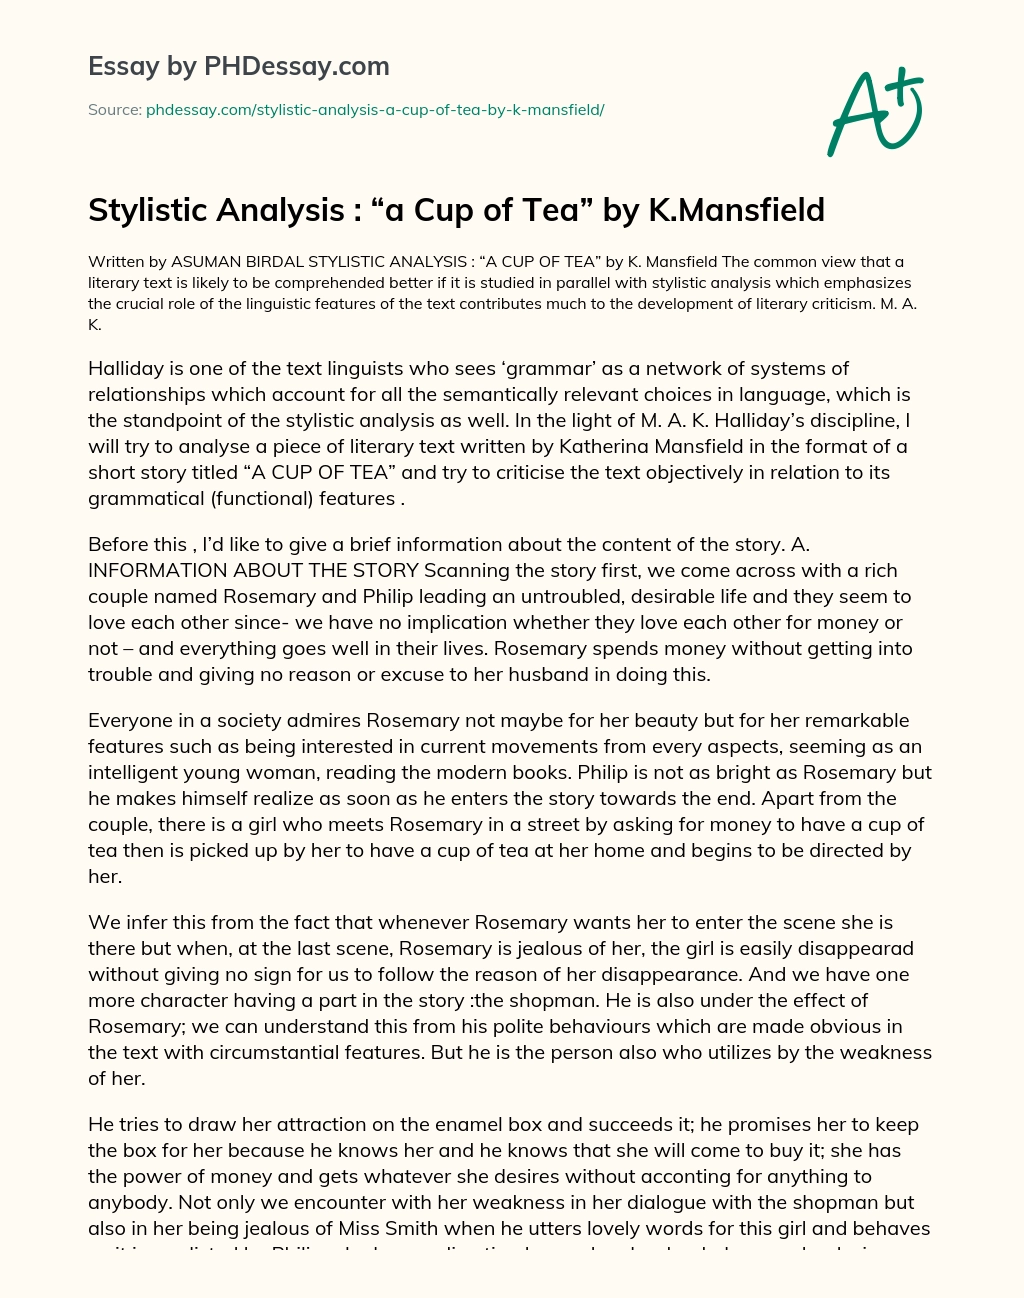 Stylistic Analysis : “a Cup of Tea” by K.Mansfield essay